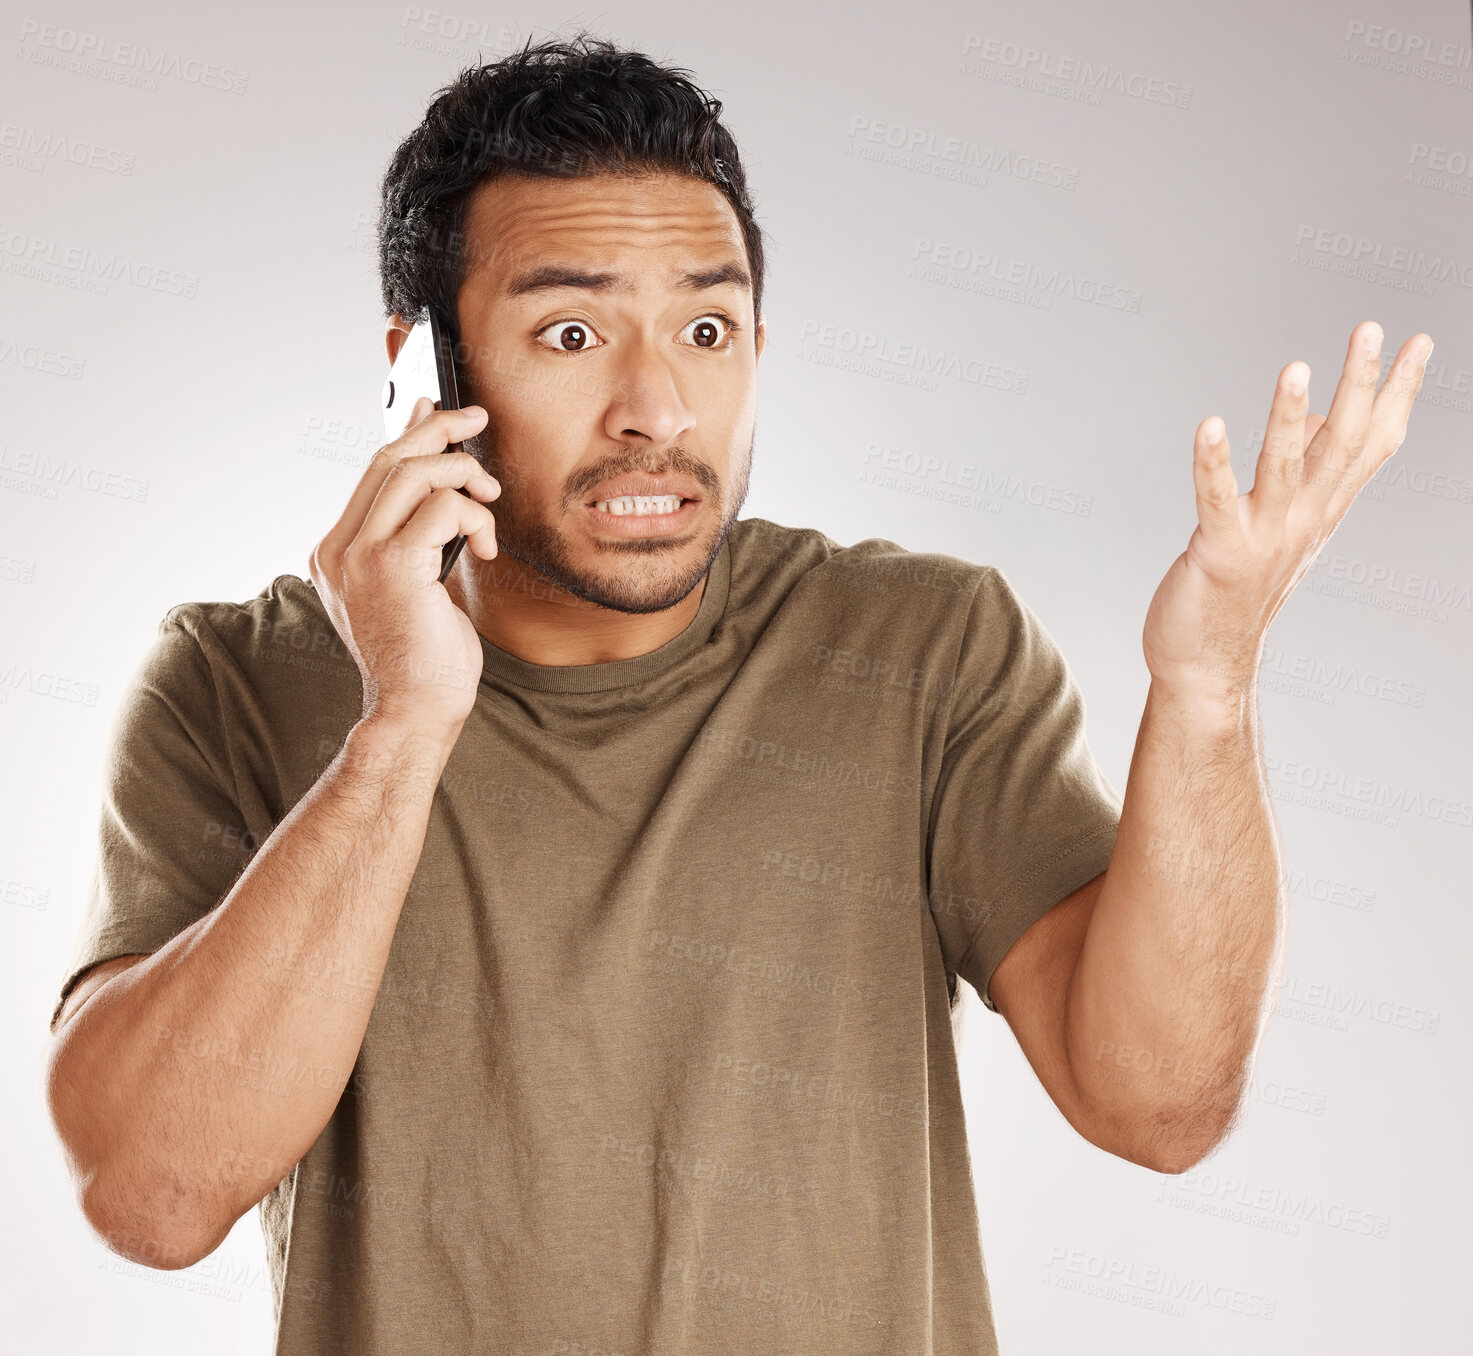 Buy stock photo Handsome young mixed race man looking irritated, aggravated or agitated while using his phone in studio isolated against a grey background. Displeased hispanic male making a call to complain or argue